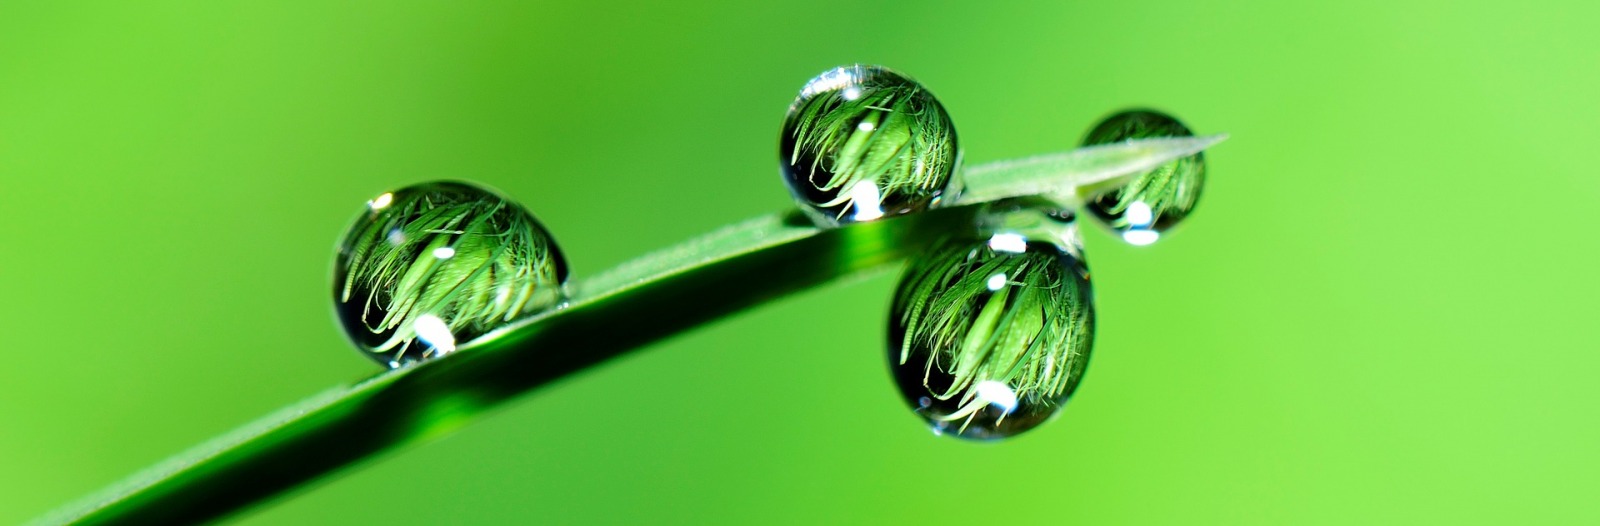 drops of water on a green stem, extreme close-up